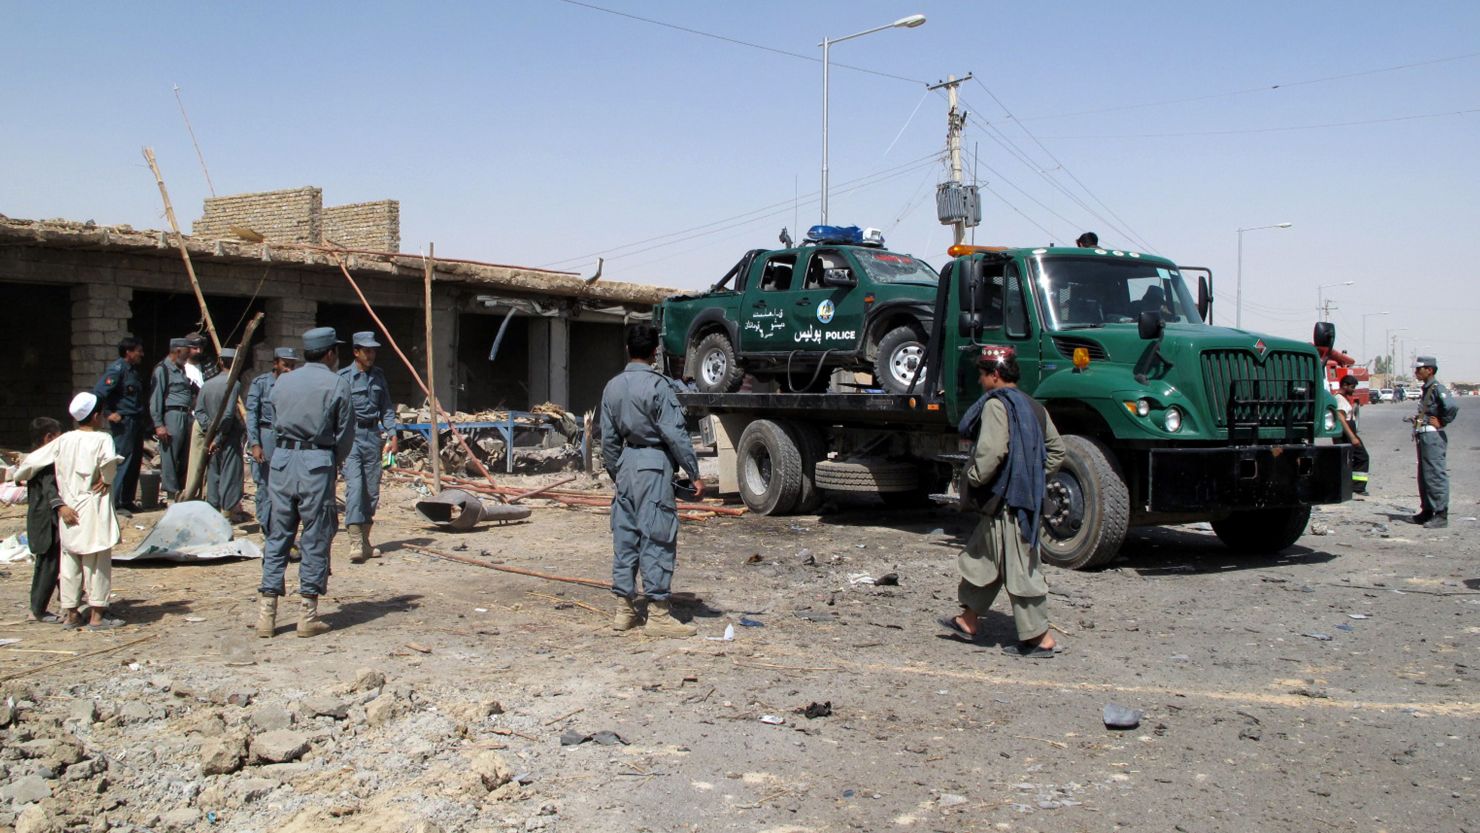 Members of Afghanistan National Police and security officials clear debris after the blast in Lashkar Gah.